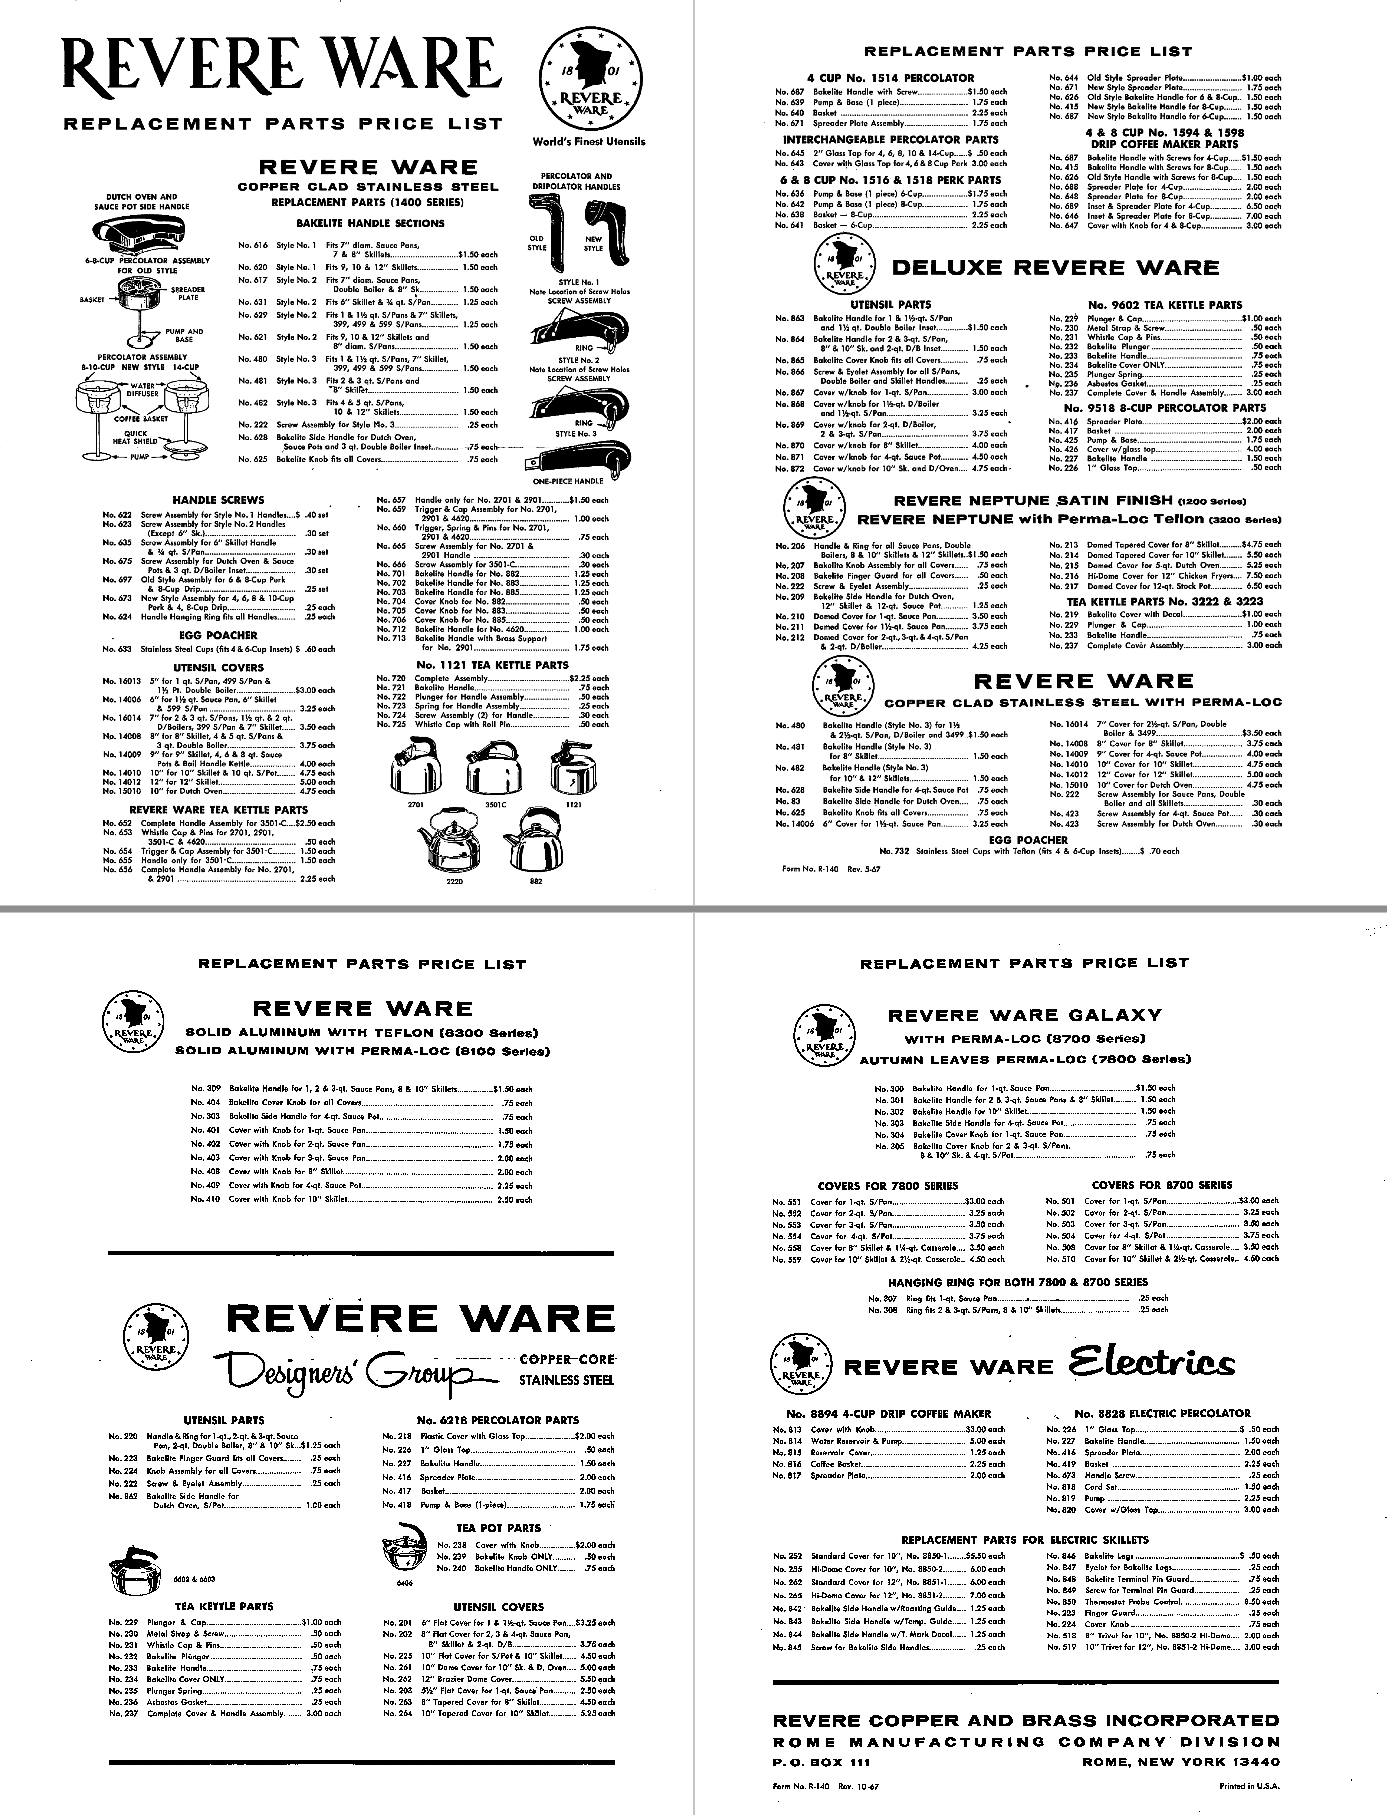 The history and future of Revere Ware replacement parts - Revere Ware Parts